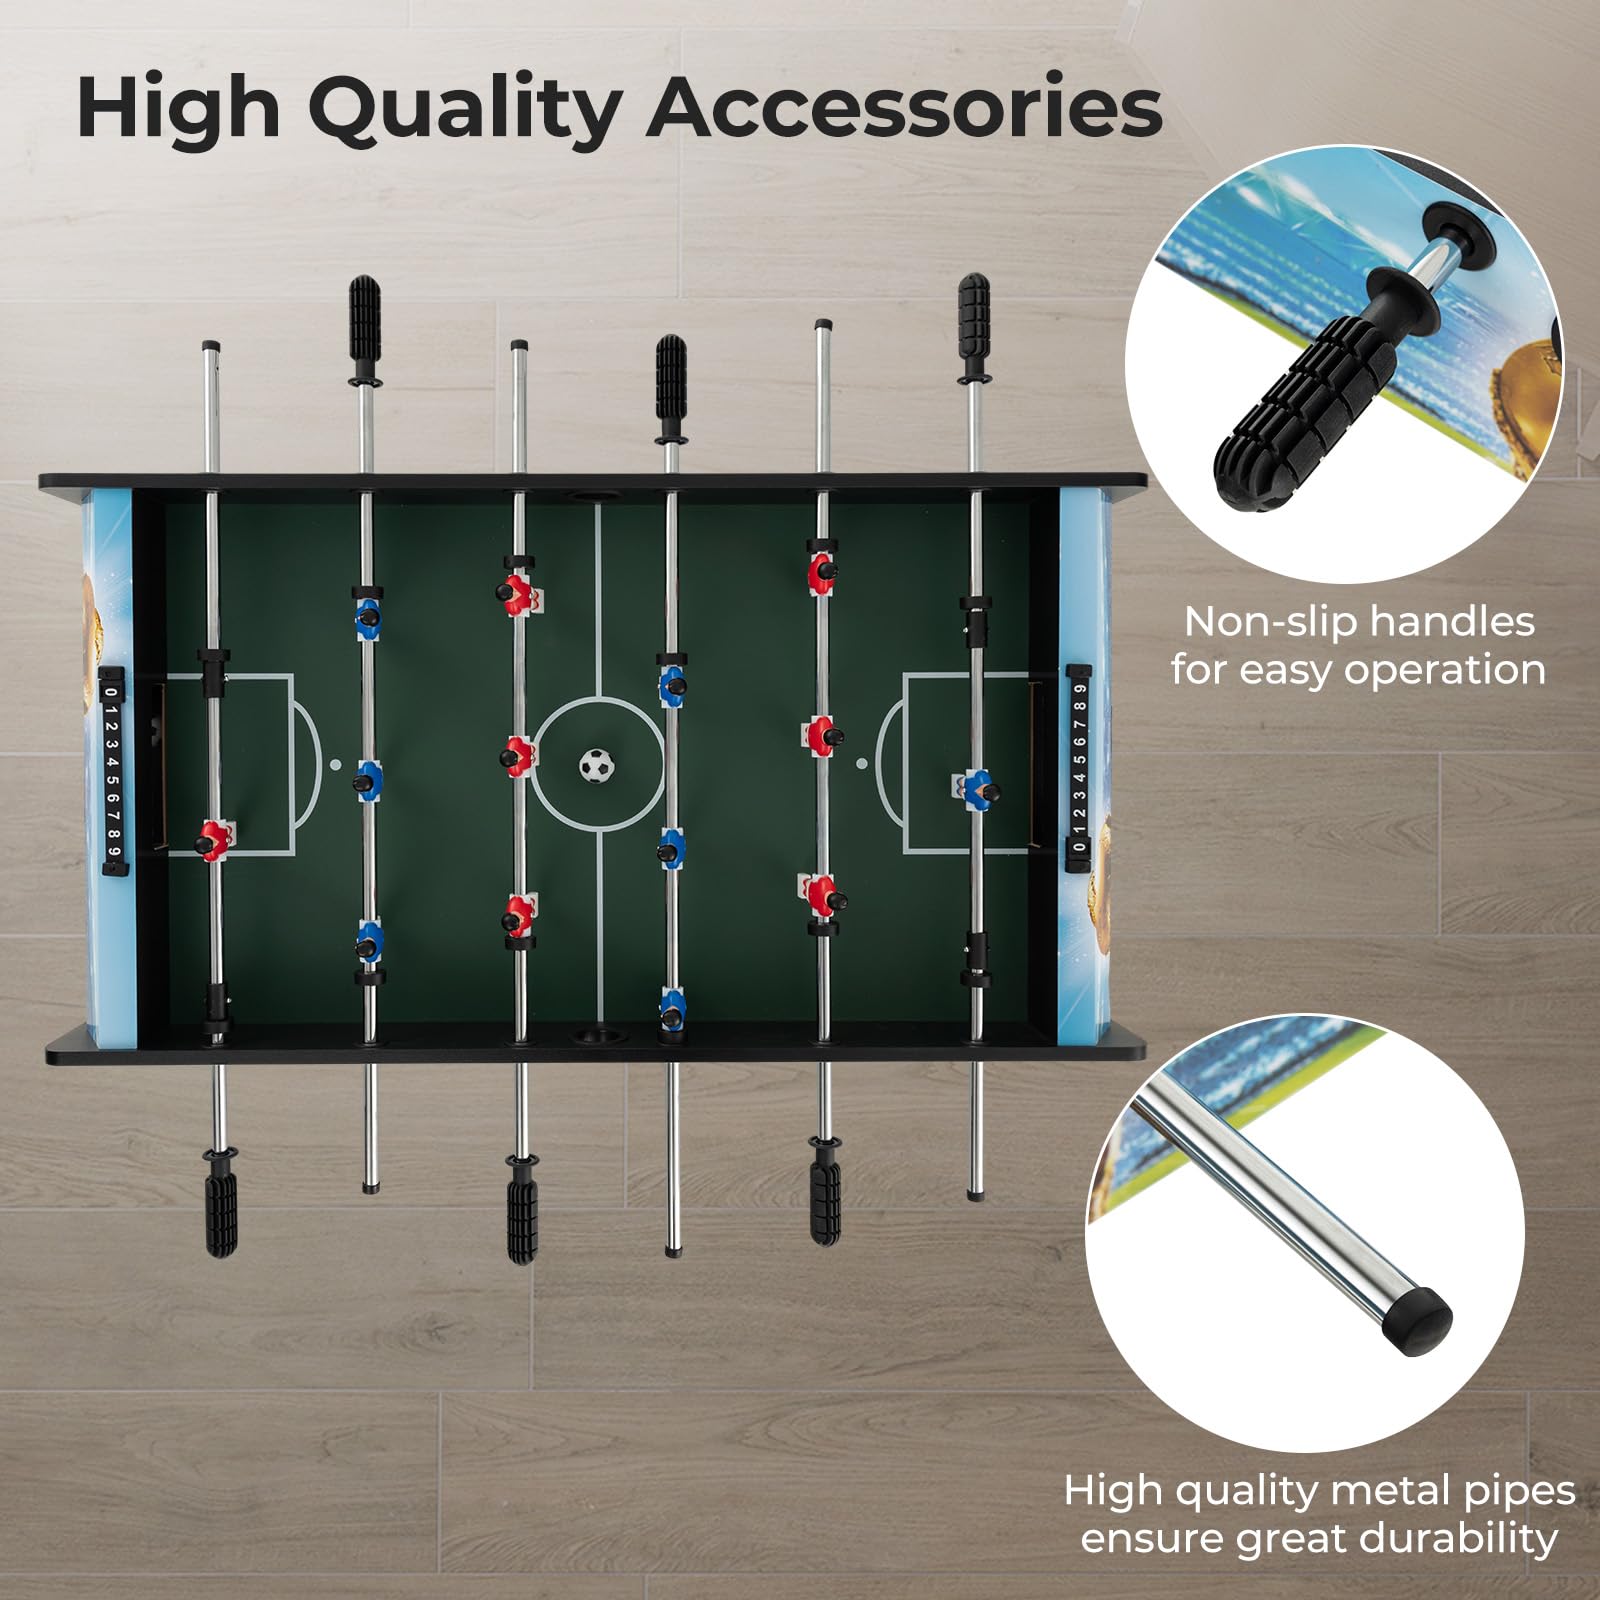 Giantex Foosball Table, 37" Foosball Table Adult Size, with 2 Balls, Score Keeper, Removable Legs